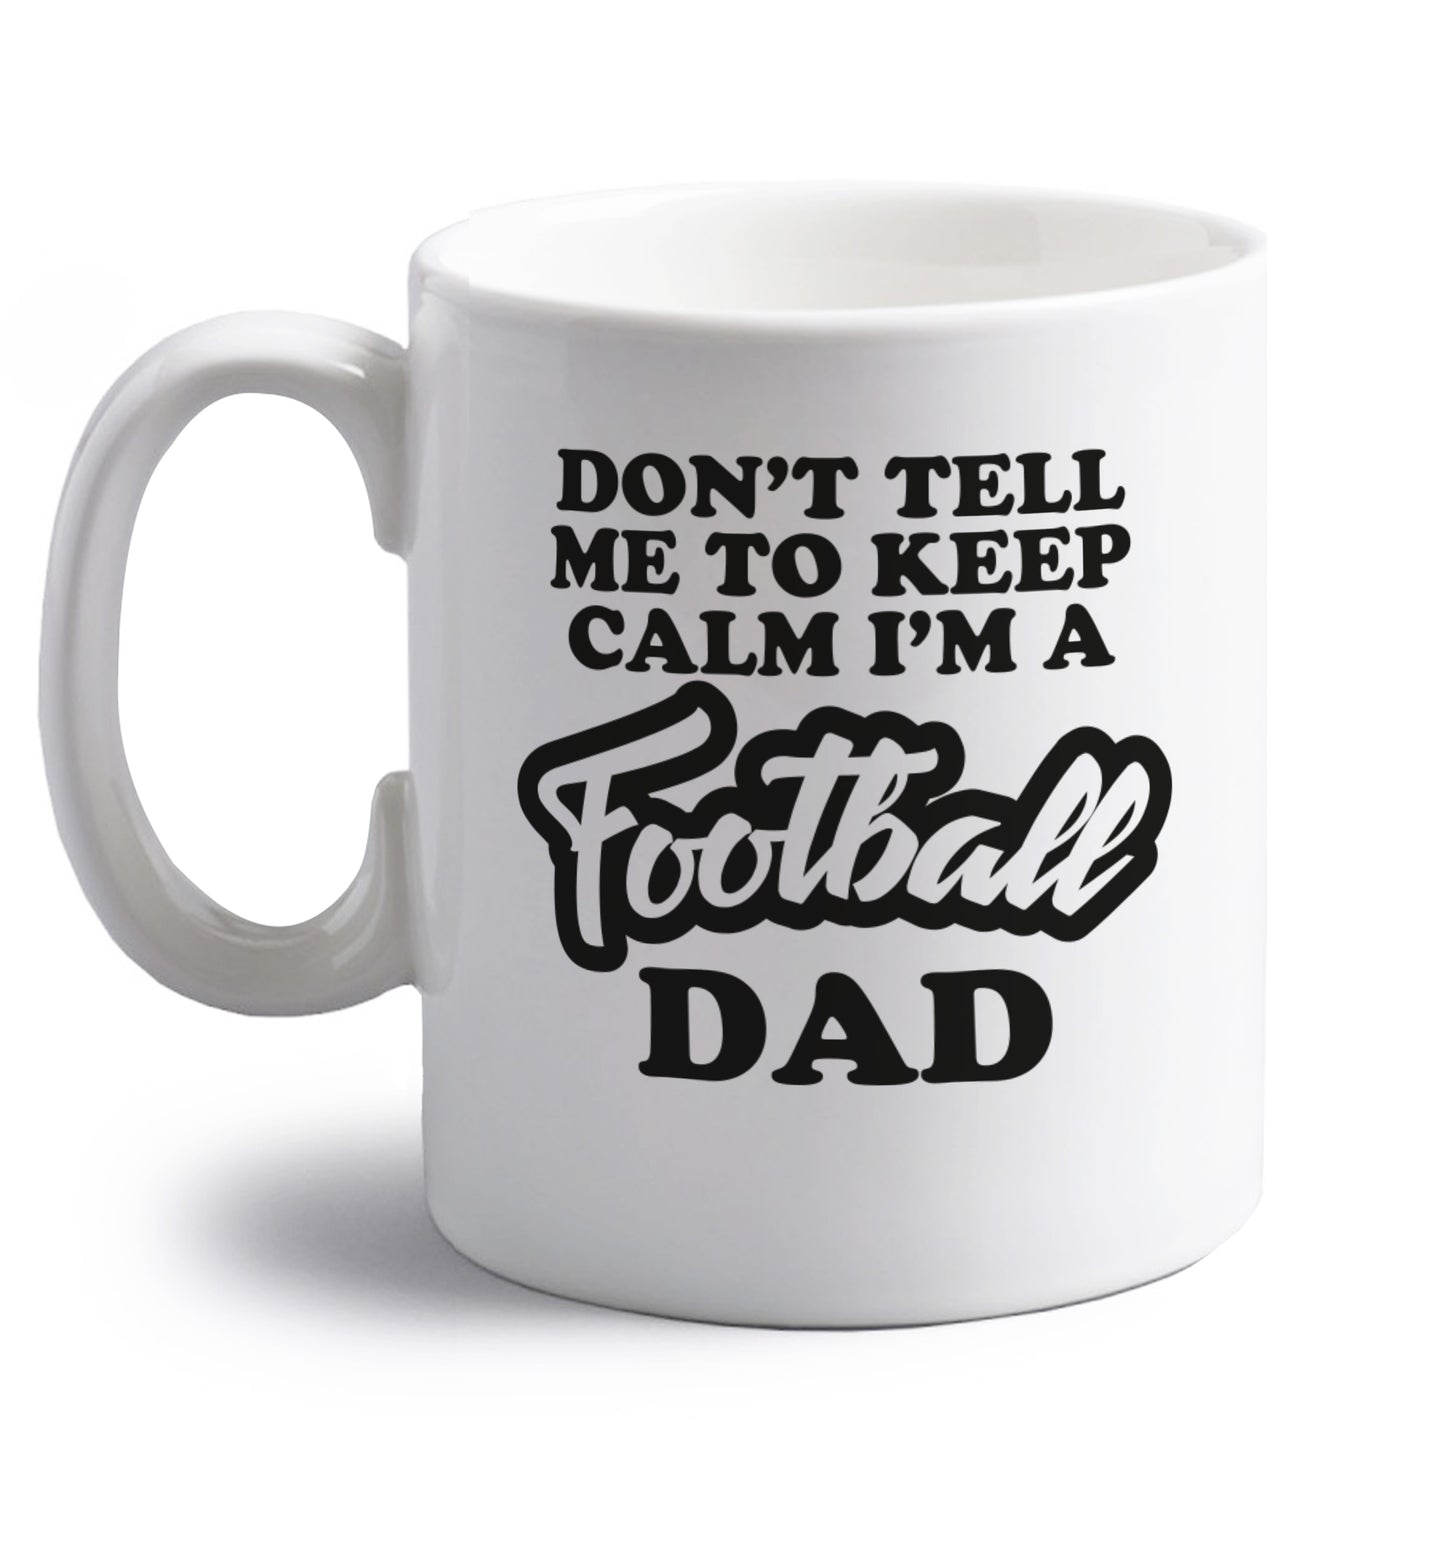 Don't tell me to keep calm I'm a football dad right handed white ceramic mug 